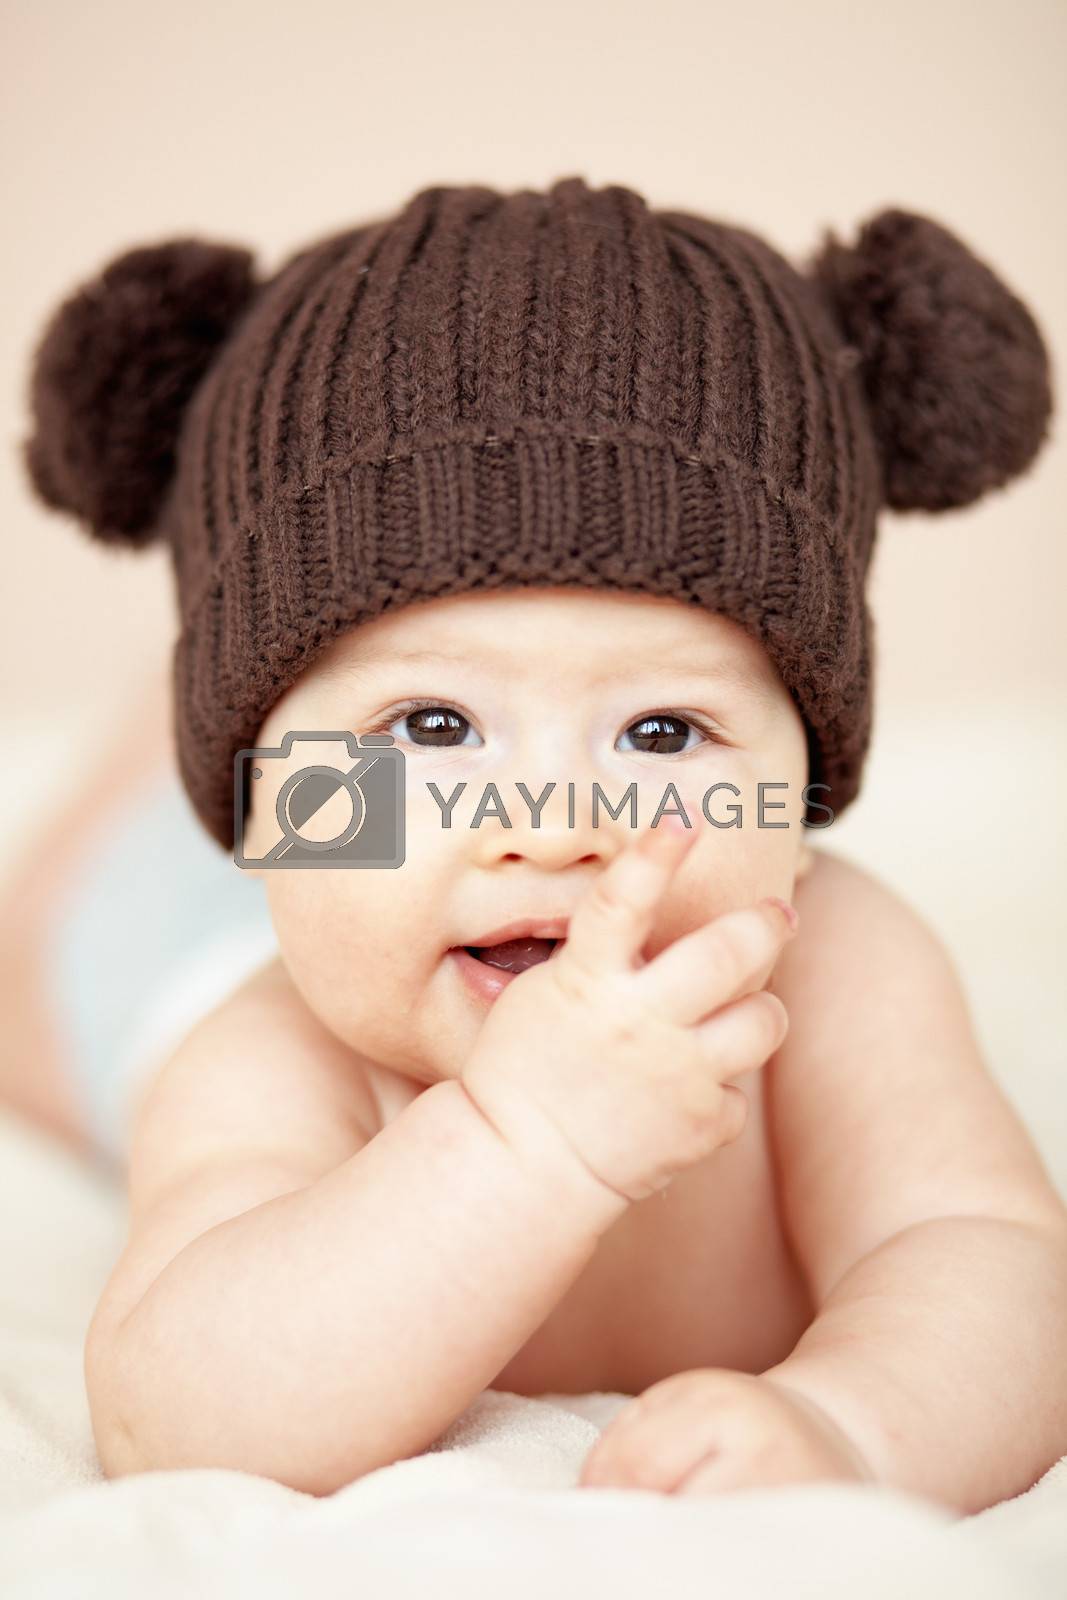 Royalty free image of Baby by alenkasm